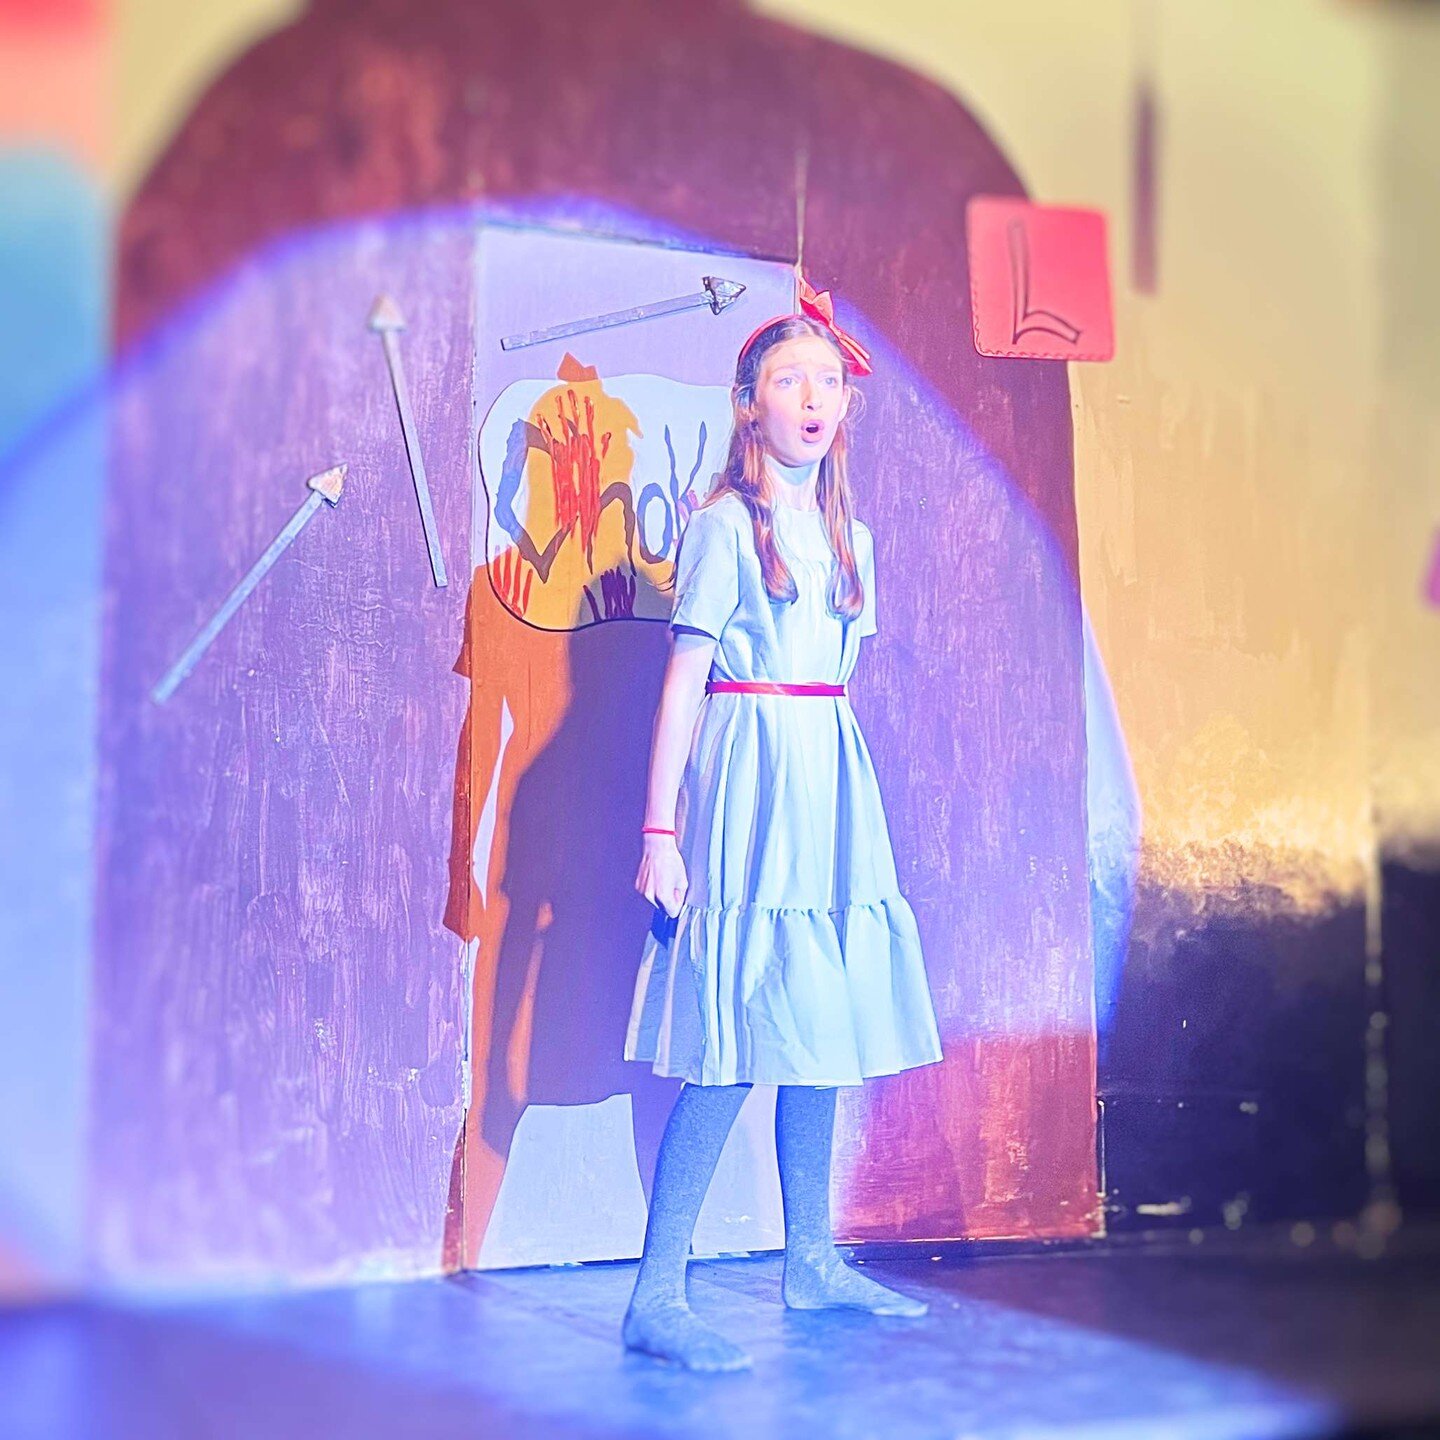 All our Main School children deserve a well-earned rest this holiday with the last week of term being jam-packed with their many rehearsals and performances of the school's brilliant production of the musical Roald Dahl's &quot;Matilda the Musical, J